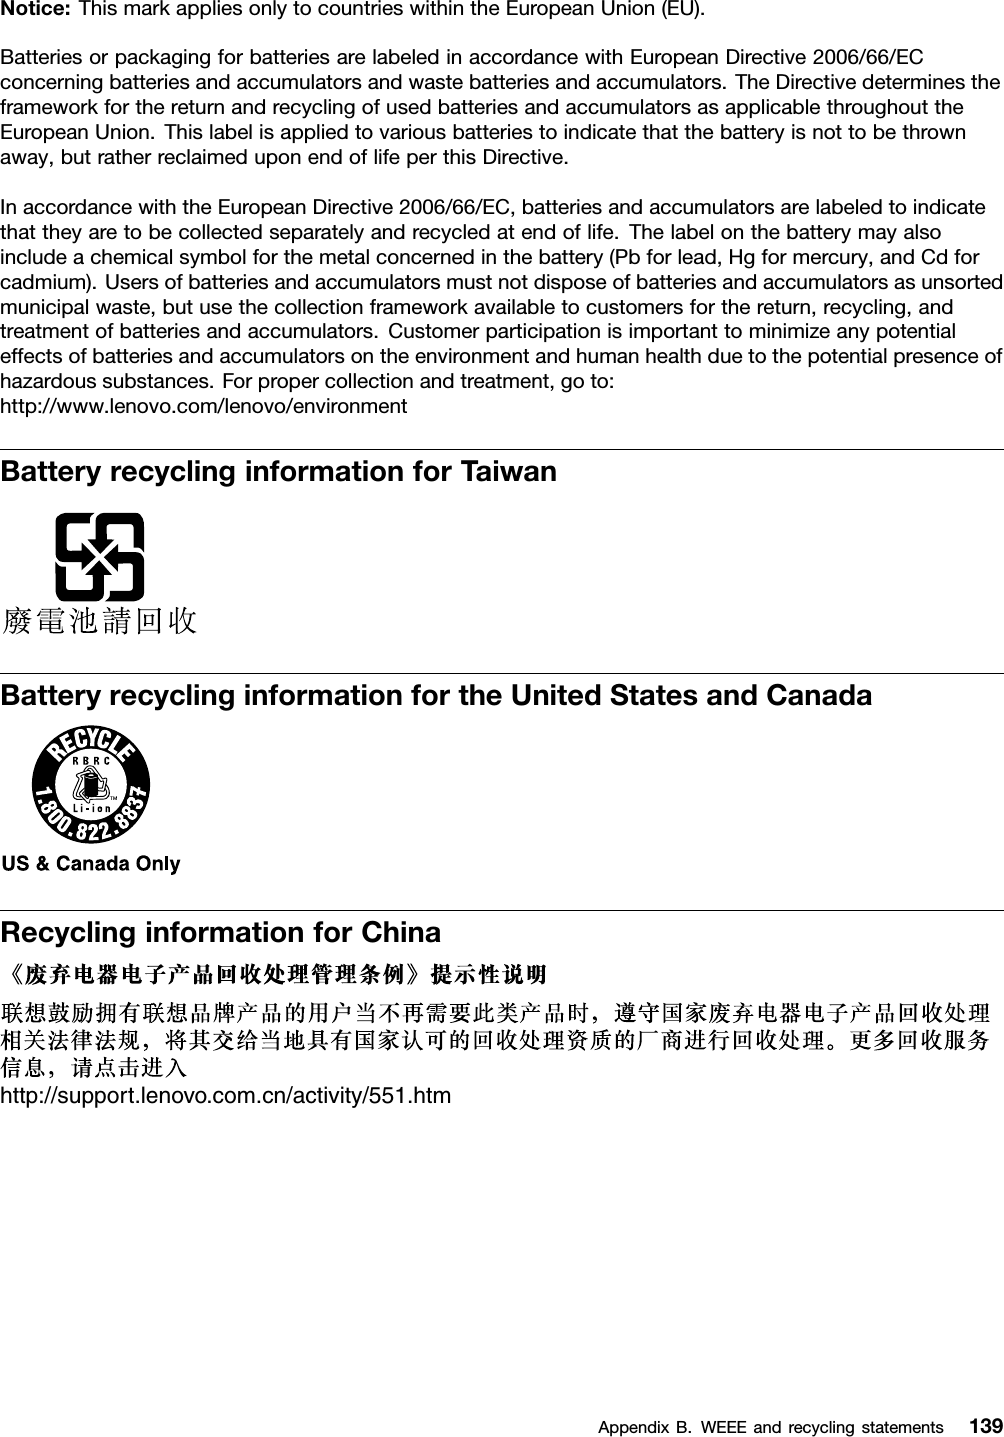 Notice: This mark applies only to countries within the European Union (EU).Batteries or packaging for batteries are labeled in accordance with European Directive 2006/66/ECconcerning batteries and accumulators and waste batteries and accumulators. The Directive determines theframework for the return and recycling of used batteries and accumulators as applicable throughout theEuropean Union. This label is applied to various batteries to indicate that the battery is not to be thrownaway, but rather reclaimed upon end of life per this Directive.In accordance with the European Directive 2006/66/EC, batteries and accumulators are labeled to indicatethat they are to be collected separately and recycled at end of life. The label on the battery may alsoinclude a chemical symbol for the metal concerned in the battery (Pb for lead, Hg for mercury, and Cd forcadmium). Users of batteries and accumulators must not dispose of batteries and accumulators as unsortedmunicipal waste, but use the collection framework available to customers for the return, recycling, andtreatment of batteries and accumulators. Customer participation is important to minimize any potentialeffects of batteries and accumulators on the environment and human health due to the potential presence ofhazardous substances. For proper collection and treatment, go to:http://www.lenovo.com/lenovo/environmentBattery recycling information for TaiwanBattery recycling information for the United States and CanadaRecycling information for Chinahttp://support.lenovo.com.cn/activity/551.htmAppendix B. WEEE and recycling statements 139